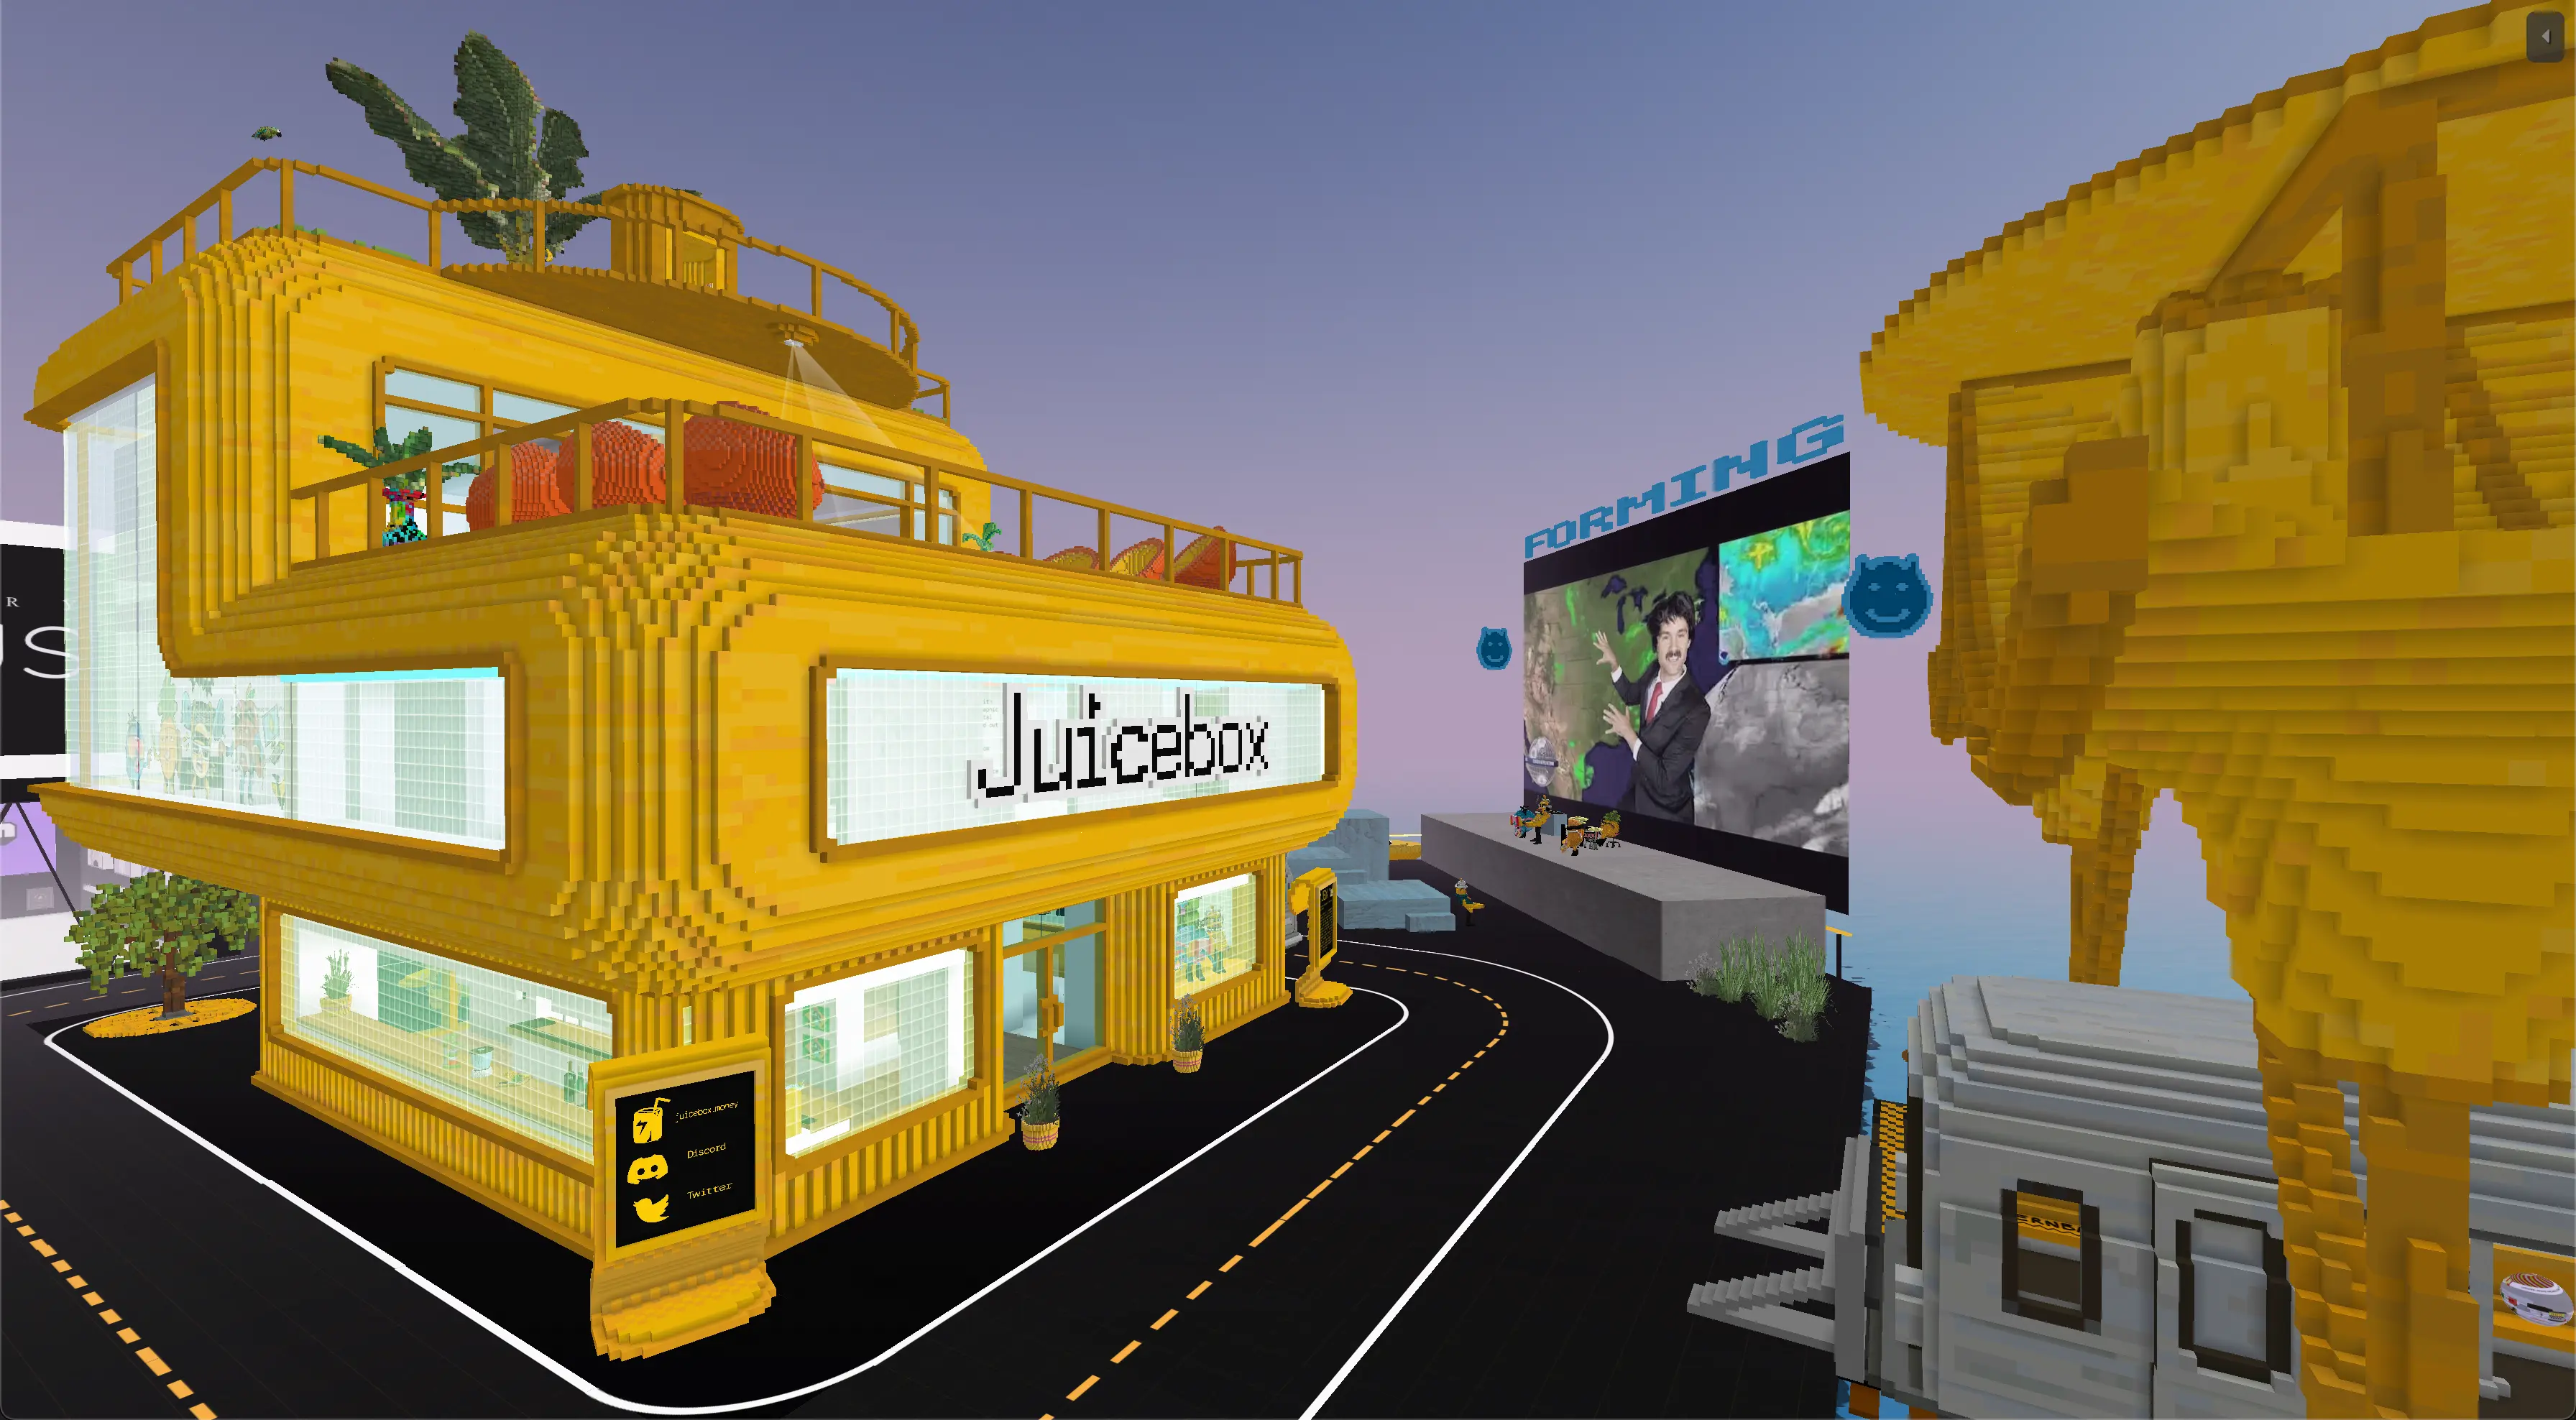 Juicebox Transit Centre and Learning Centre in Voxels